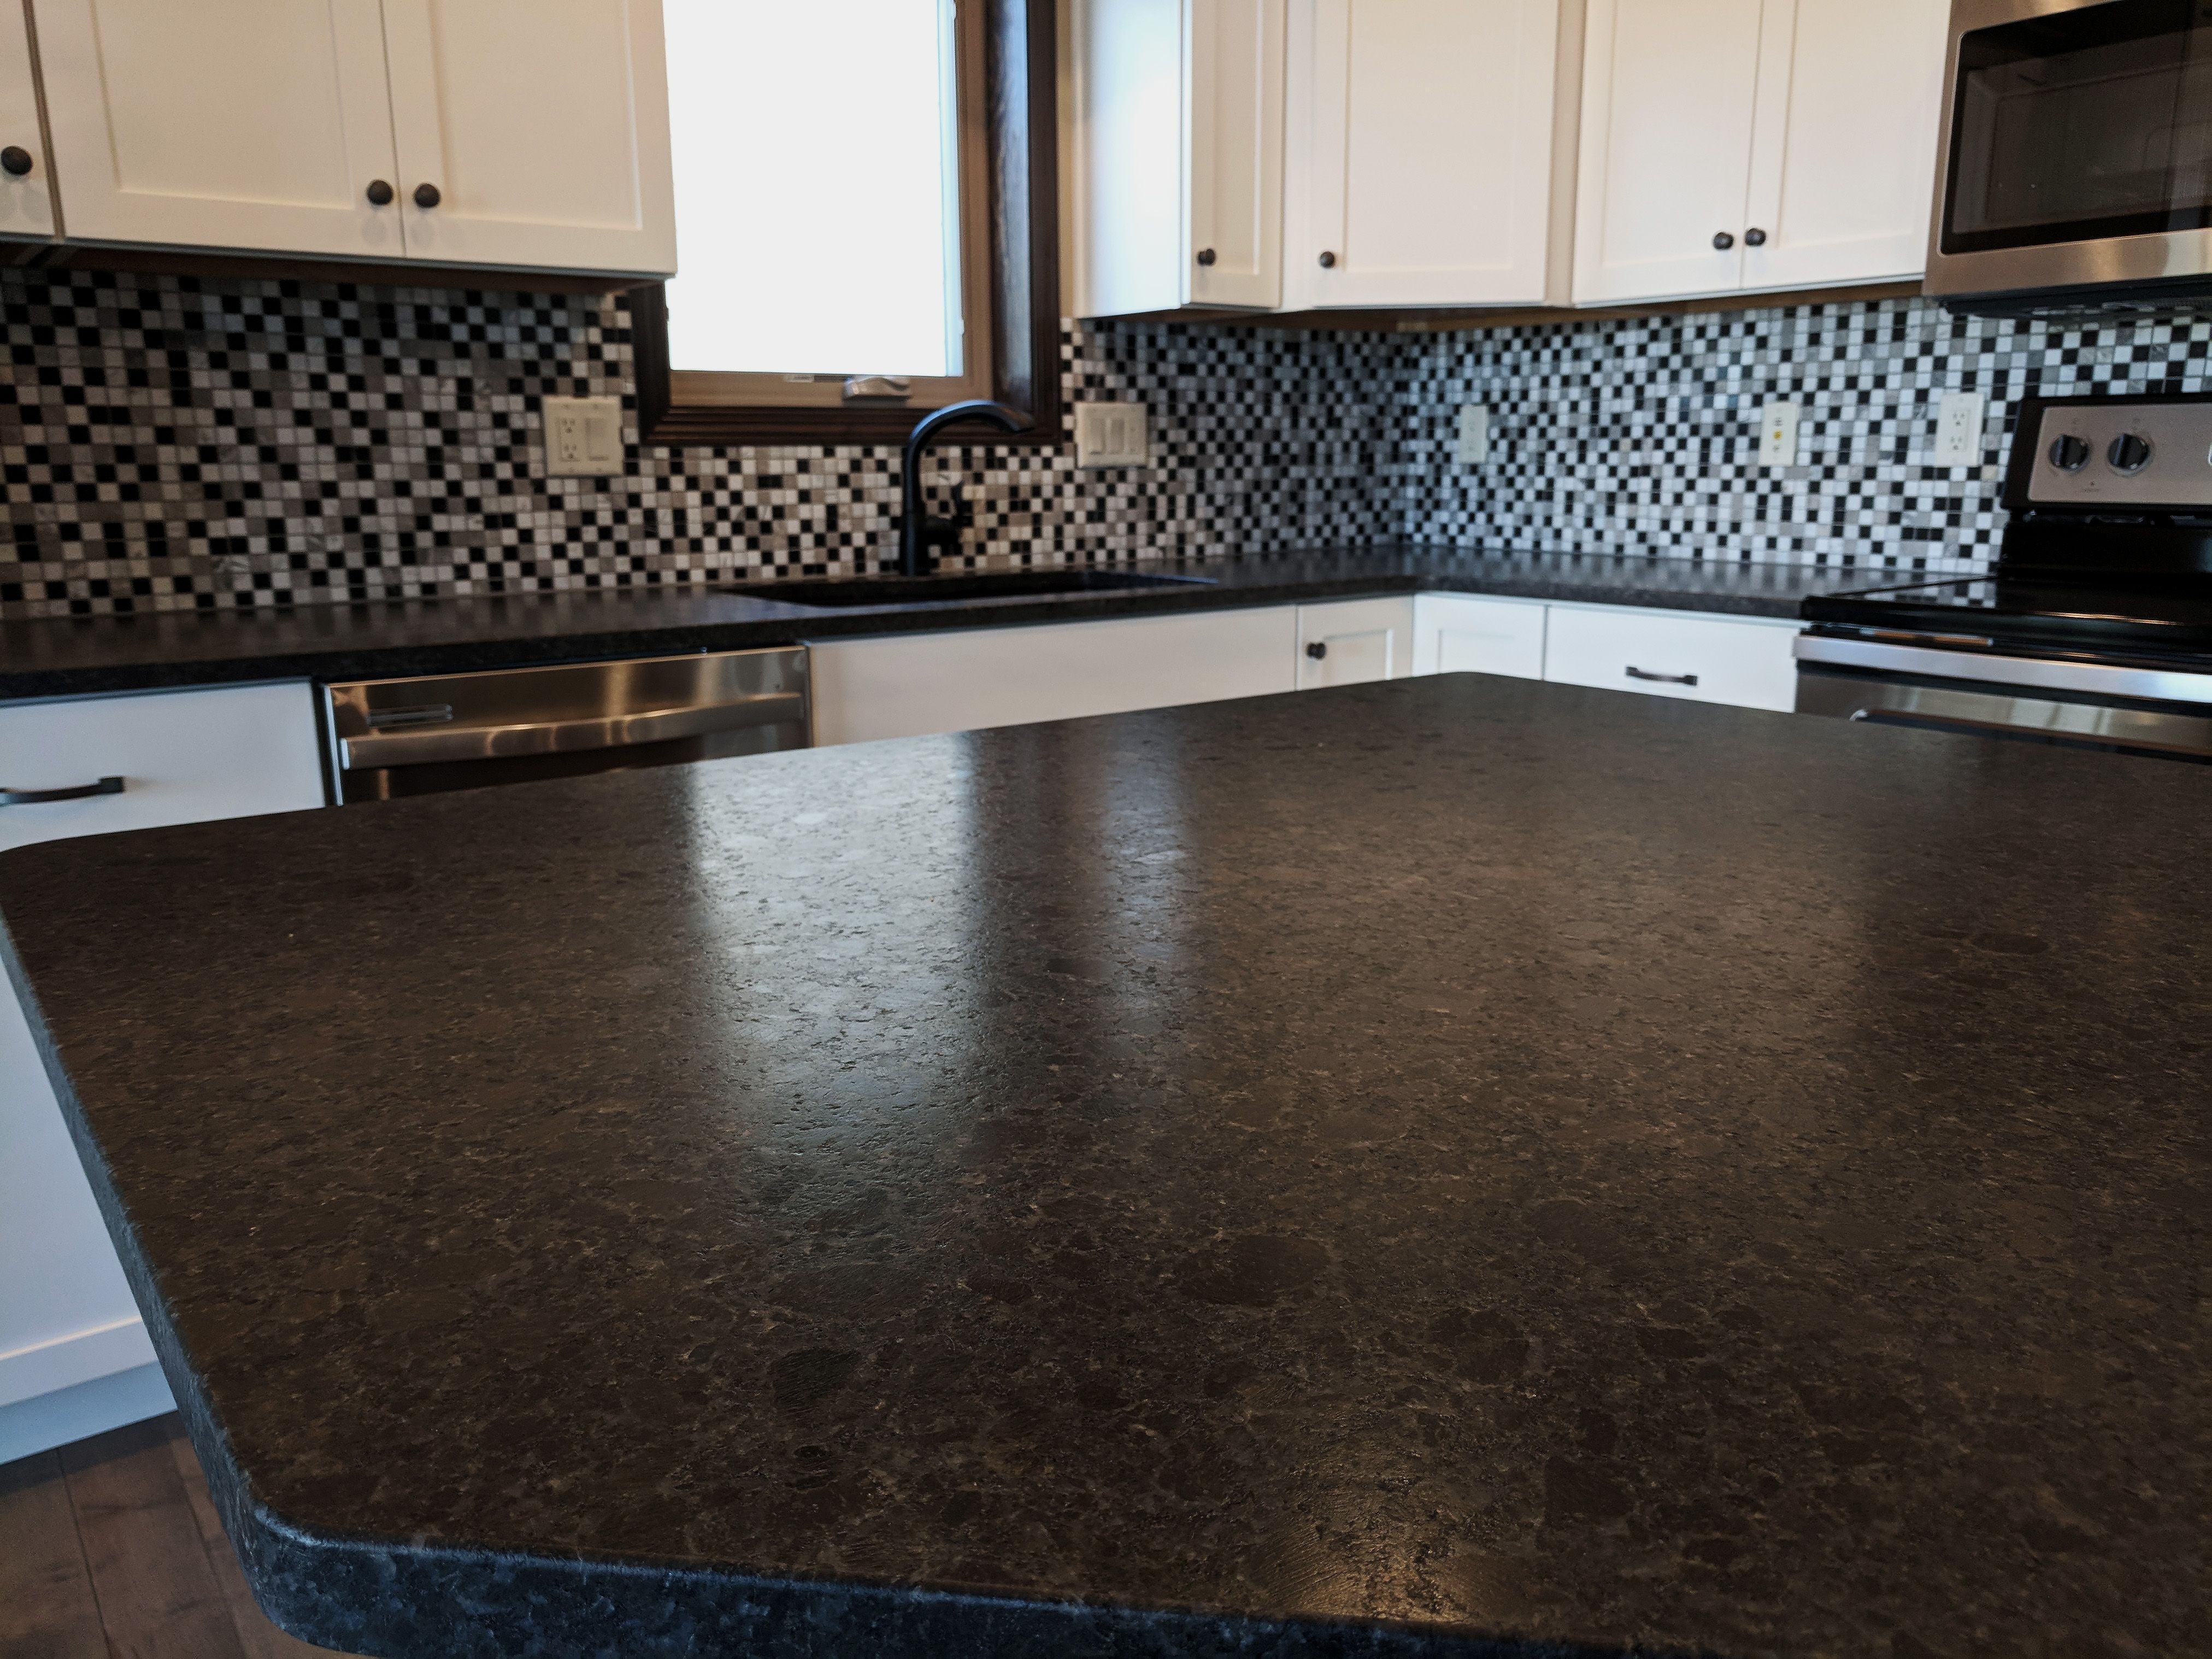 Leathered Granite Countertops Cost Randolph Indoor And Outdoor